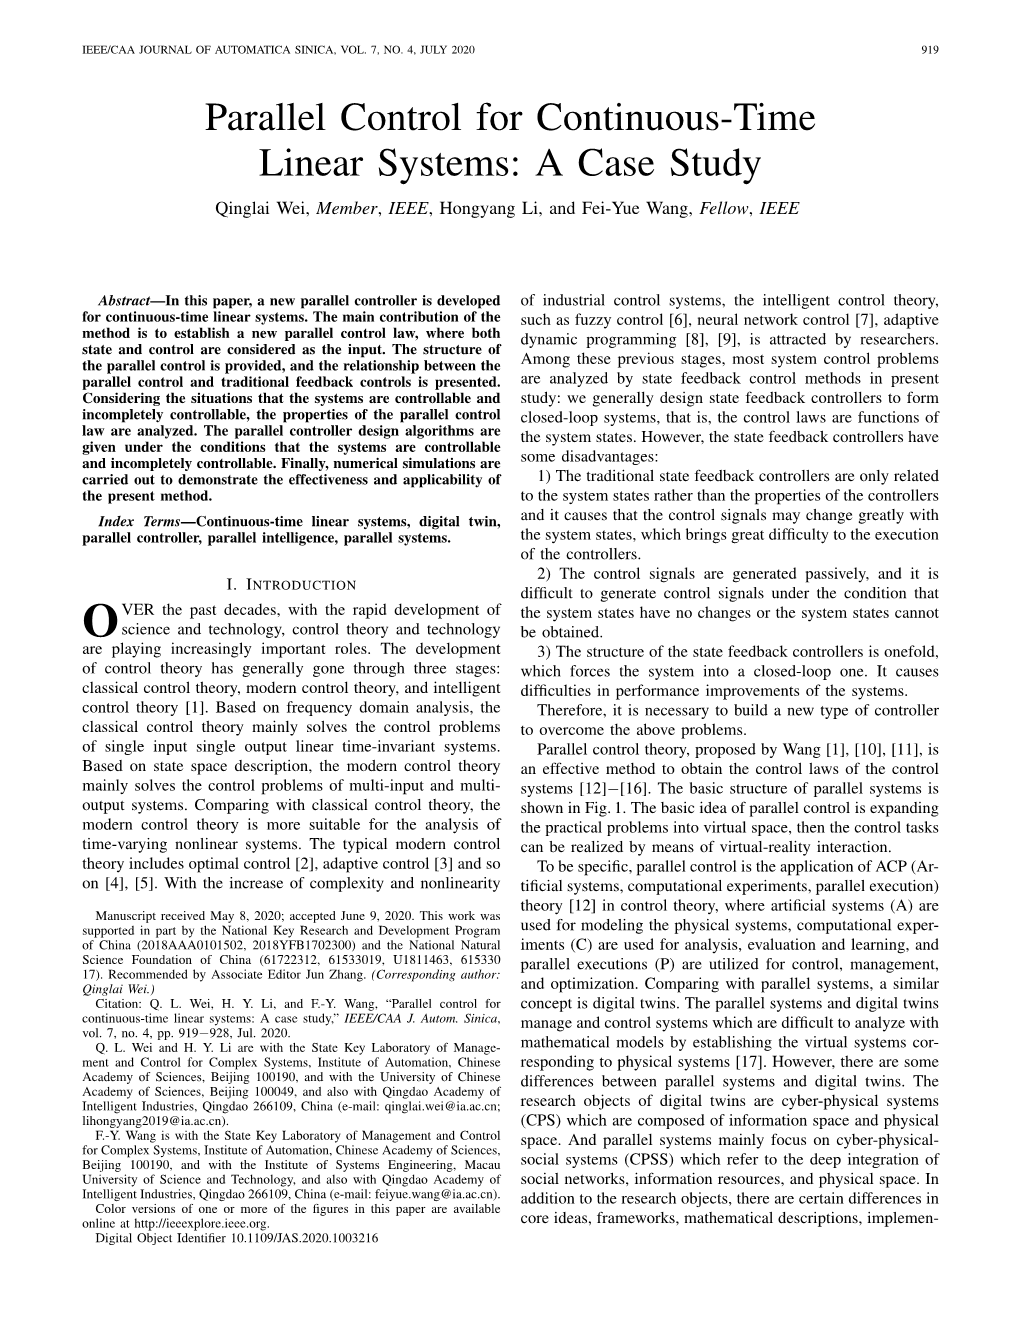 Parallel Control for Continuous-Time Linear Systems: a Case Study Qinglai Wei, Member, IEEE, Hongyang Li, and Fei-Yue Wang, Fellow, IEEE